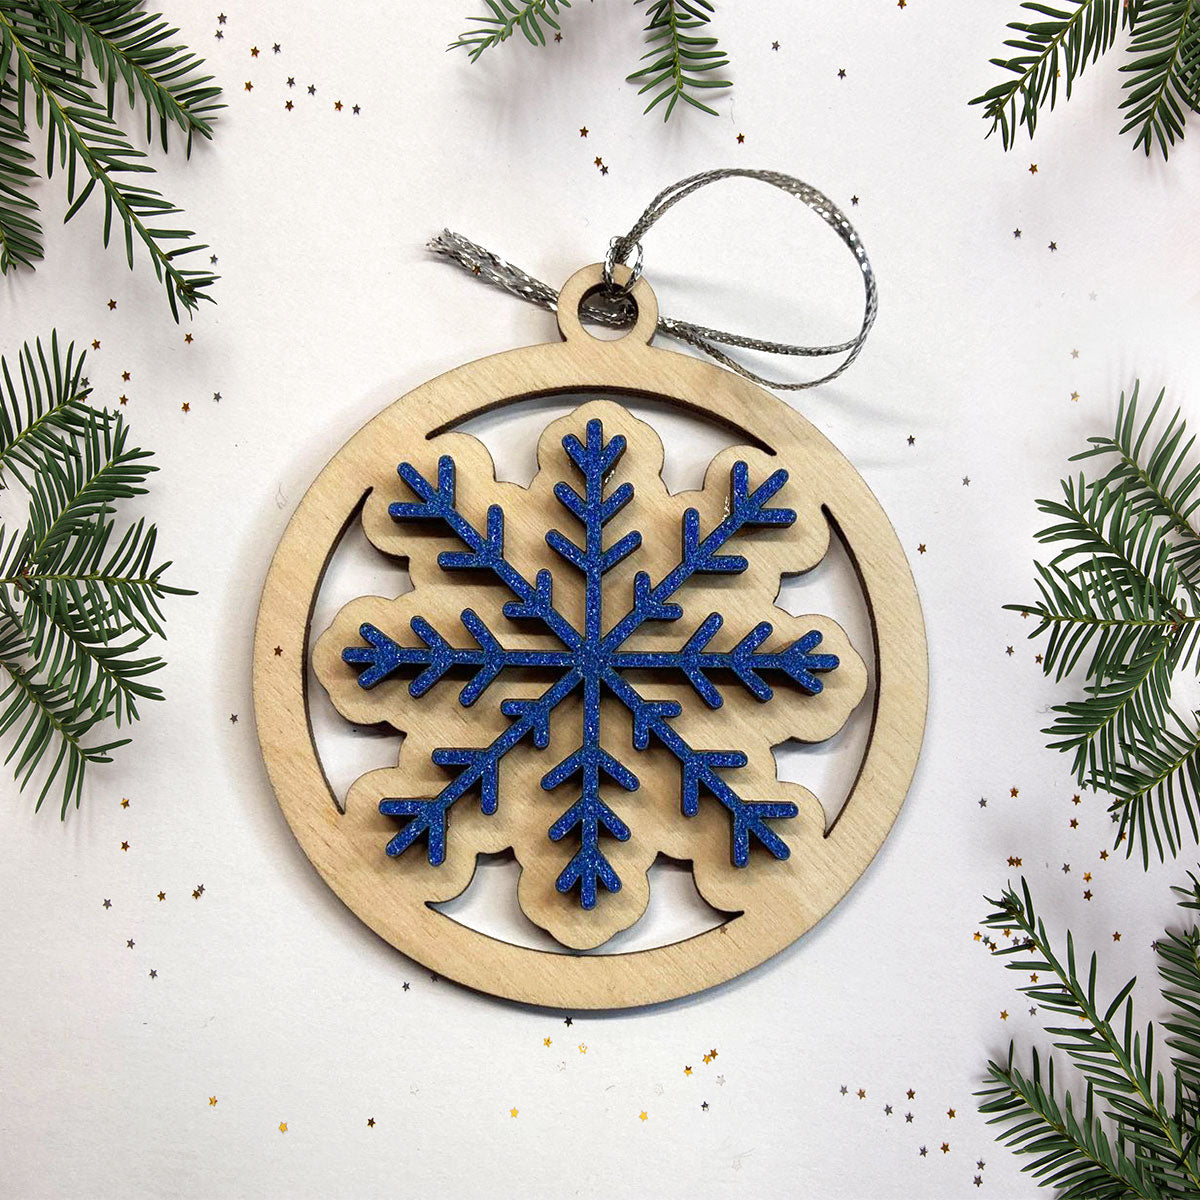 Eight Sided Snowflake Ornament